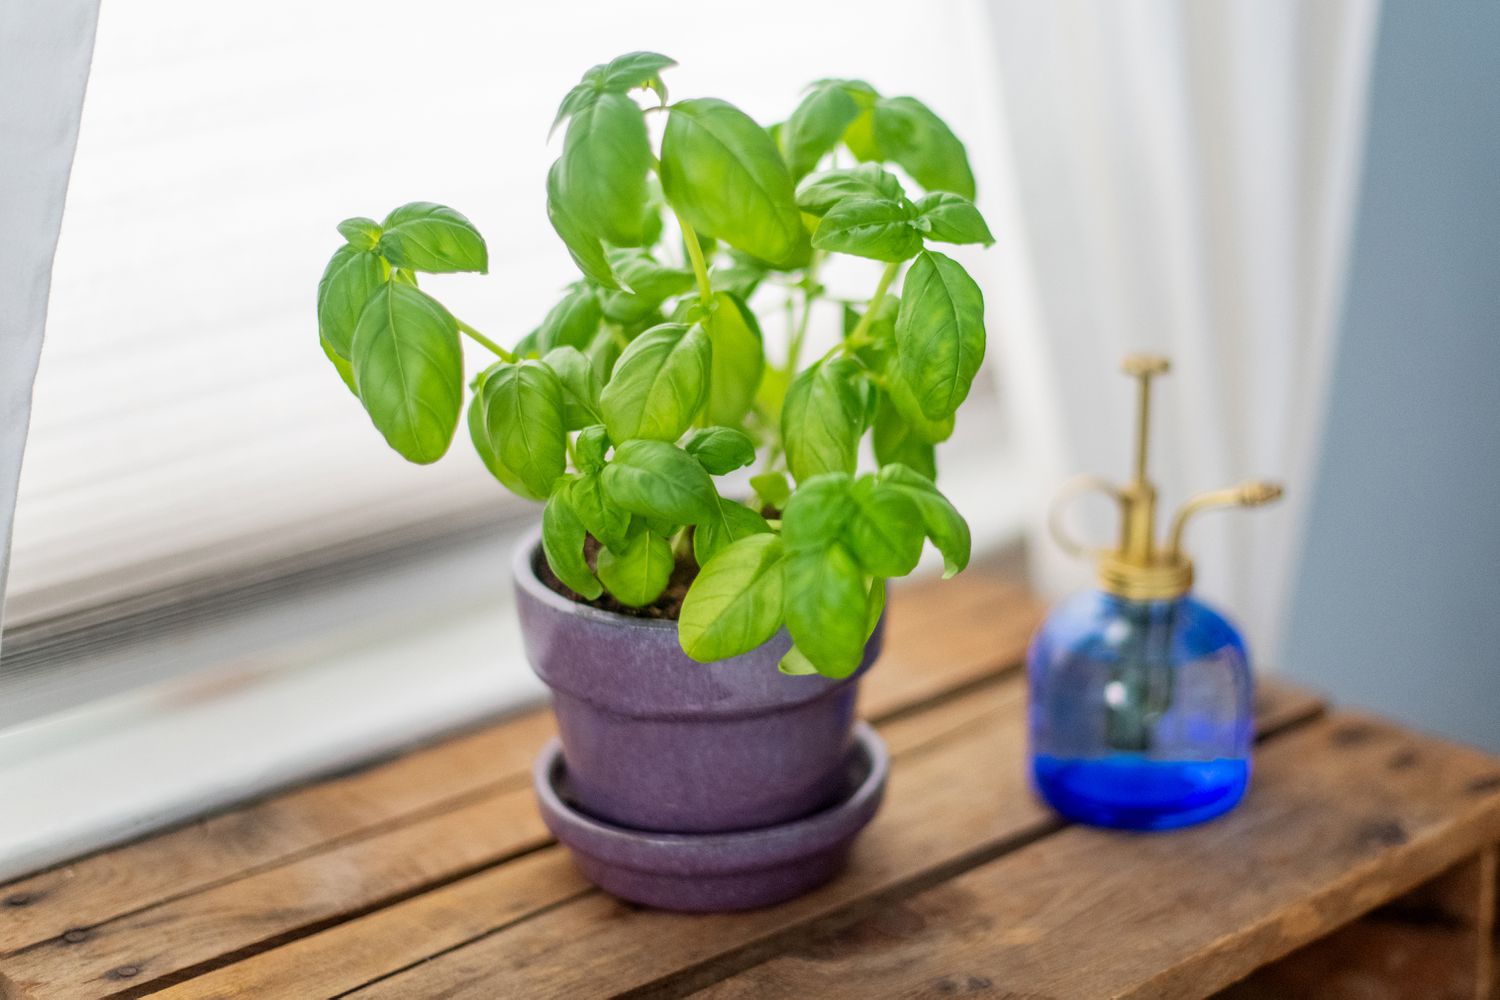 Causes And Solutions For Black Spots On Basil Leaves